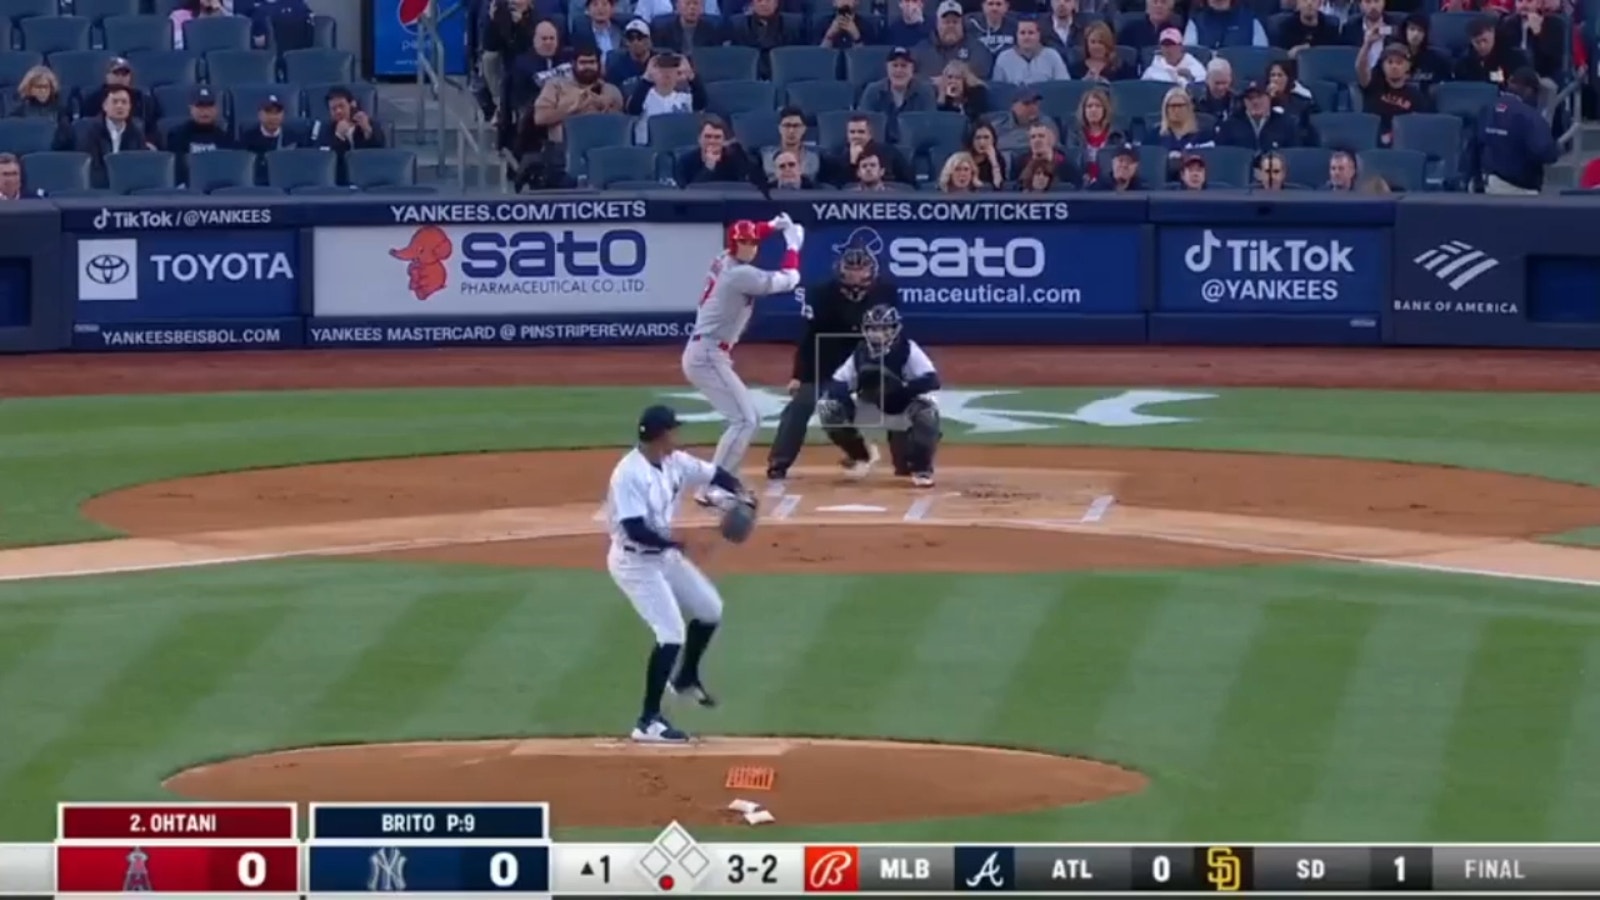 Aaron Judge of the Yankees jumps to make an incredible catch to rob Shohei Ohtani of a home run